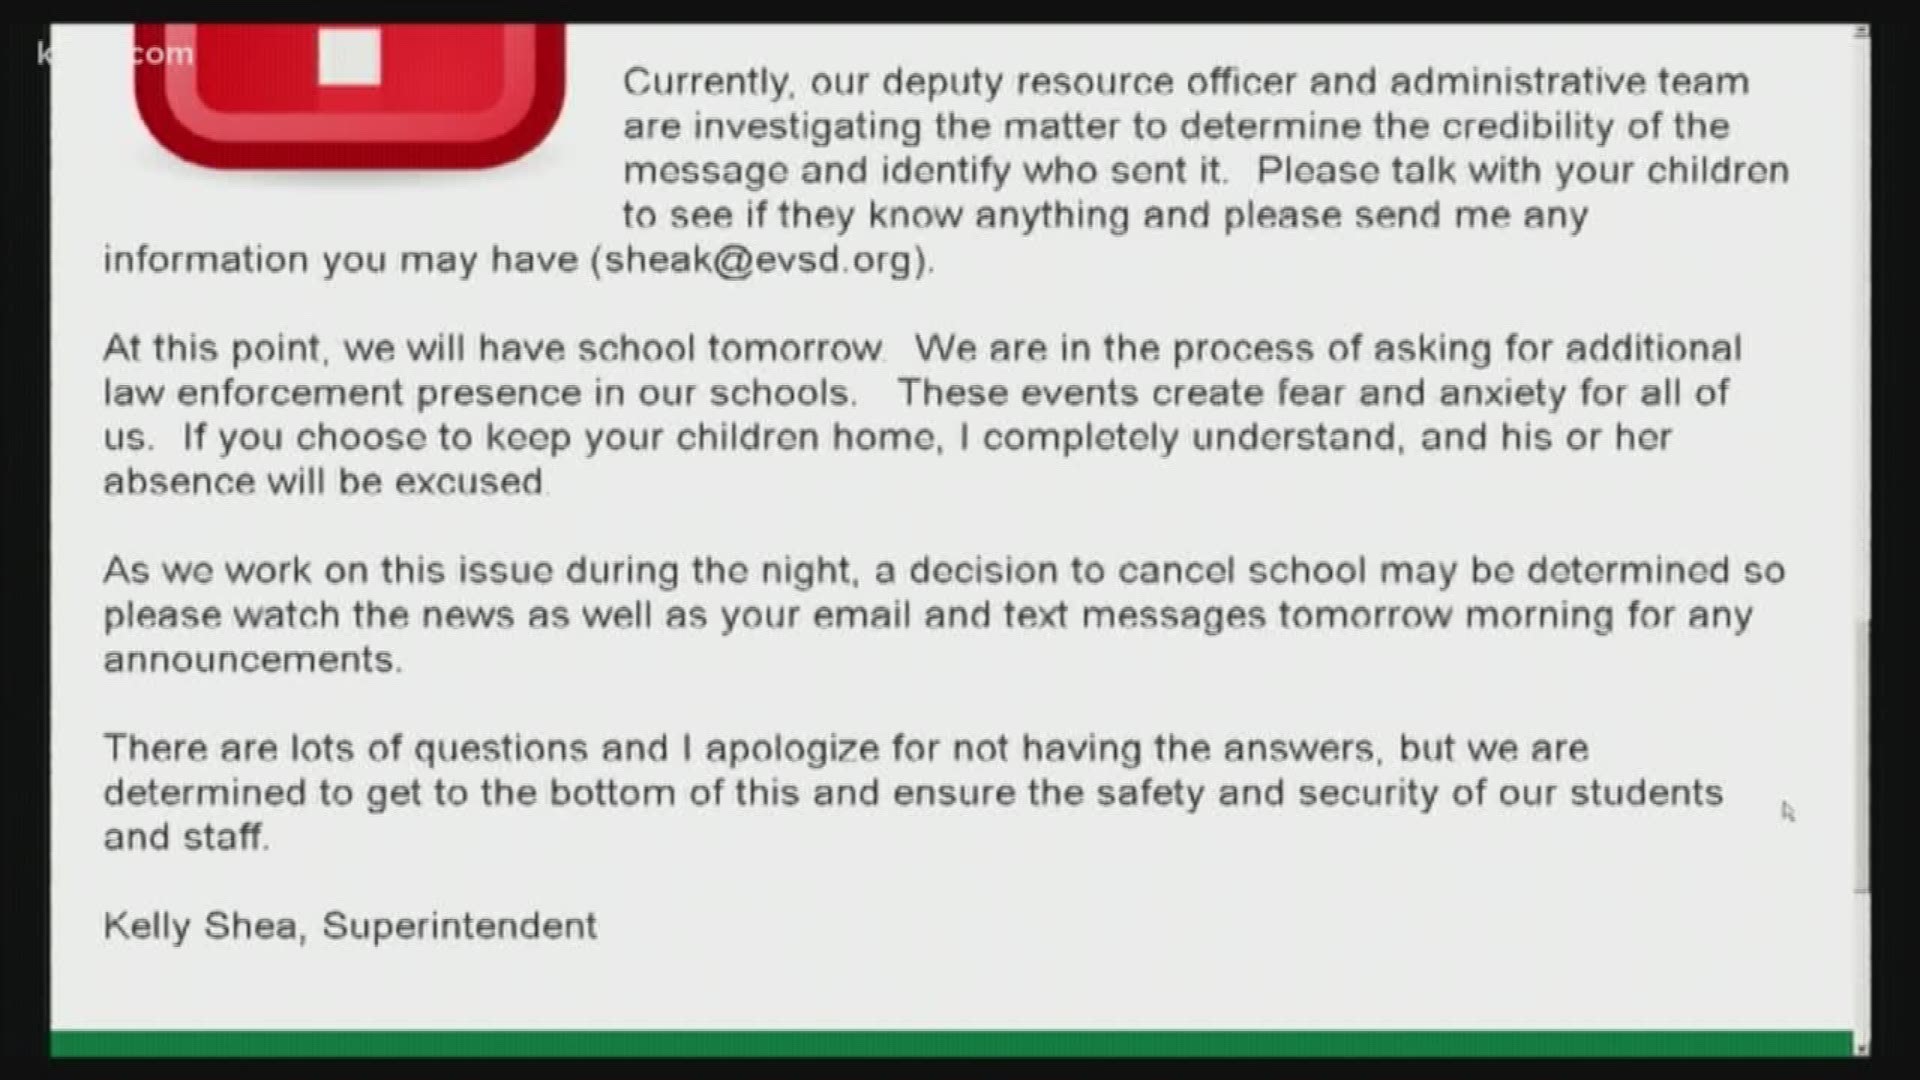 School is scheduled to run as normal on Tuesday, but the district said it may make the decision to cancel overnight.